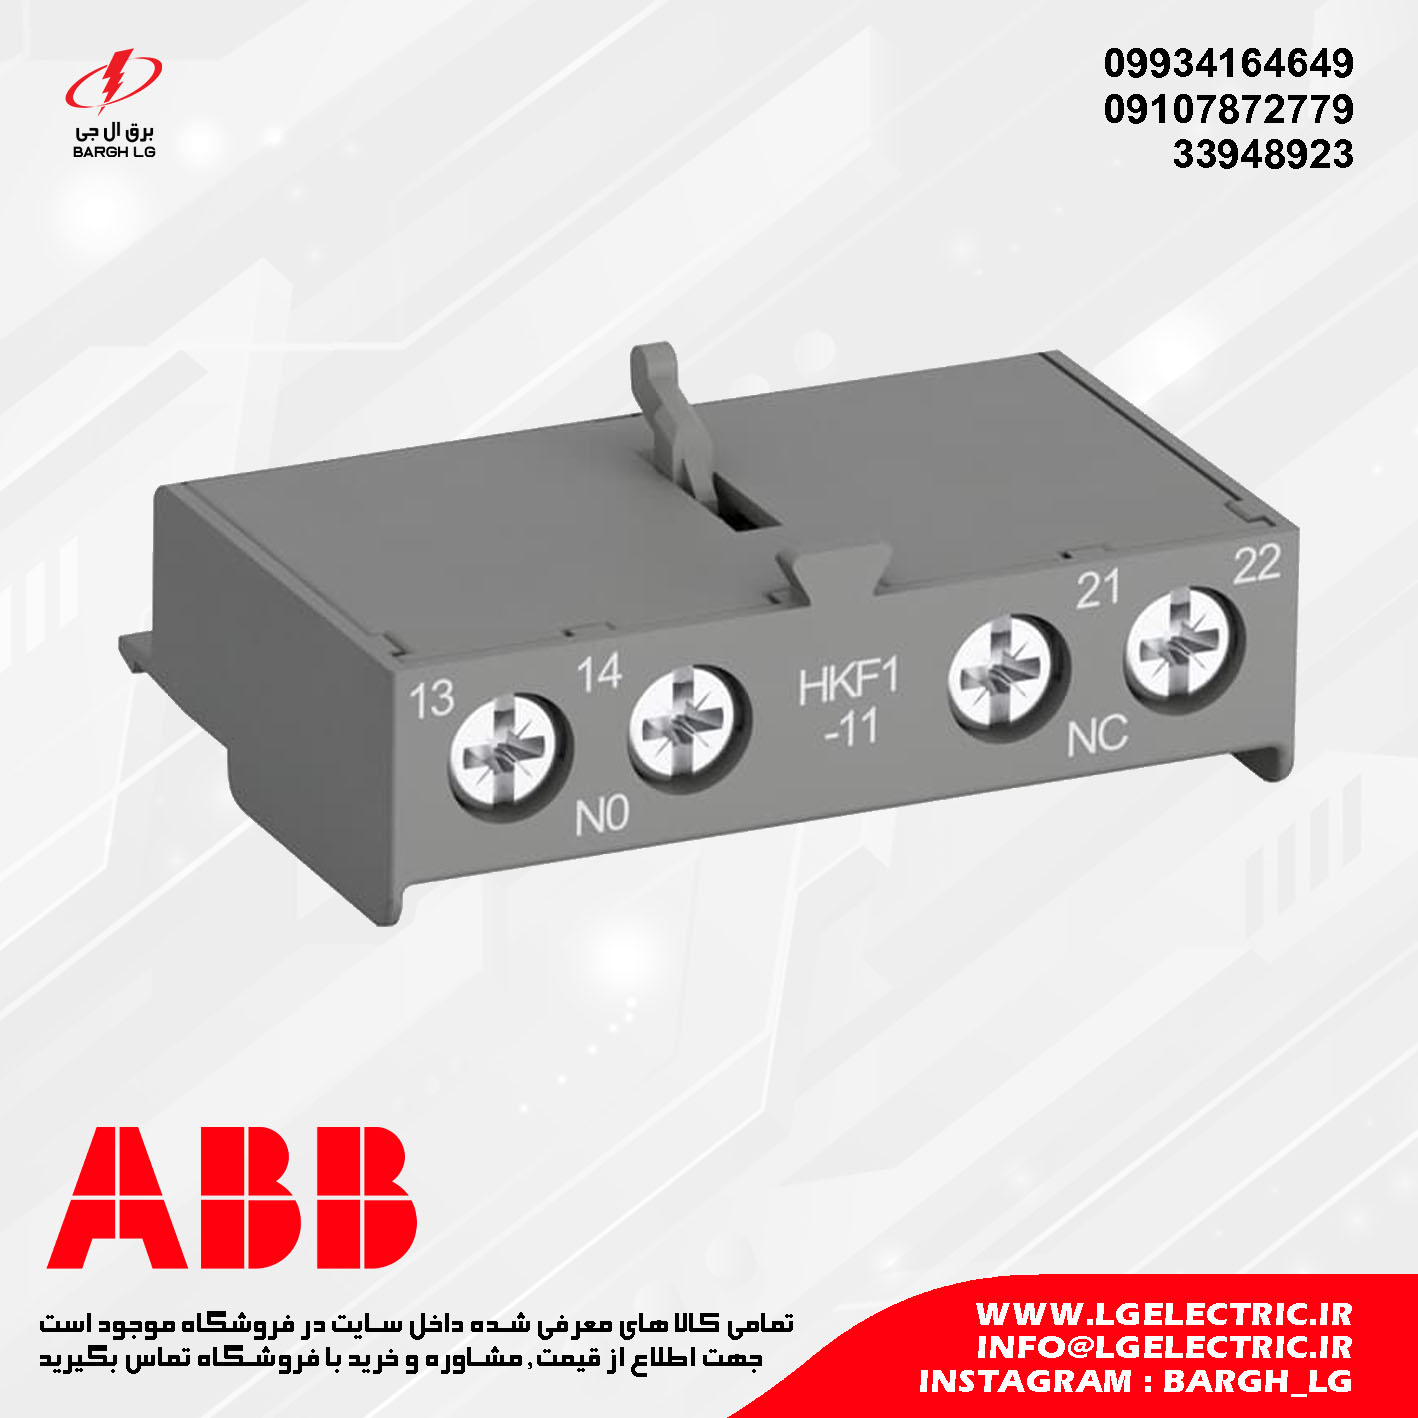 ABB HKF1 Auxiliary Contact